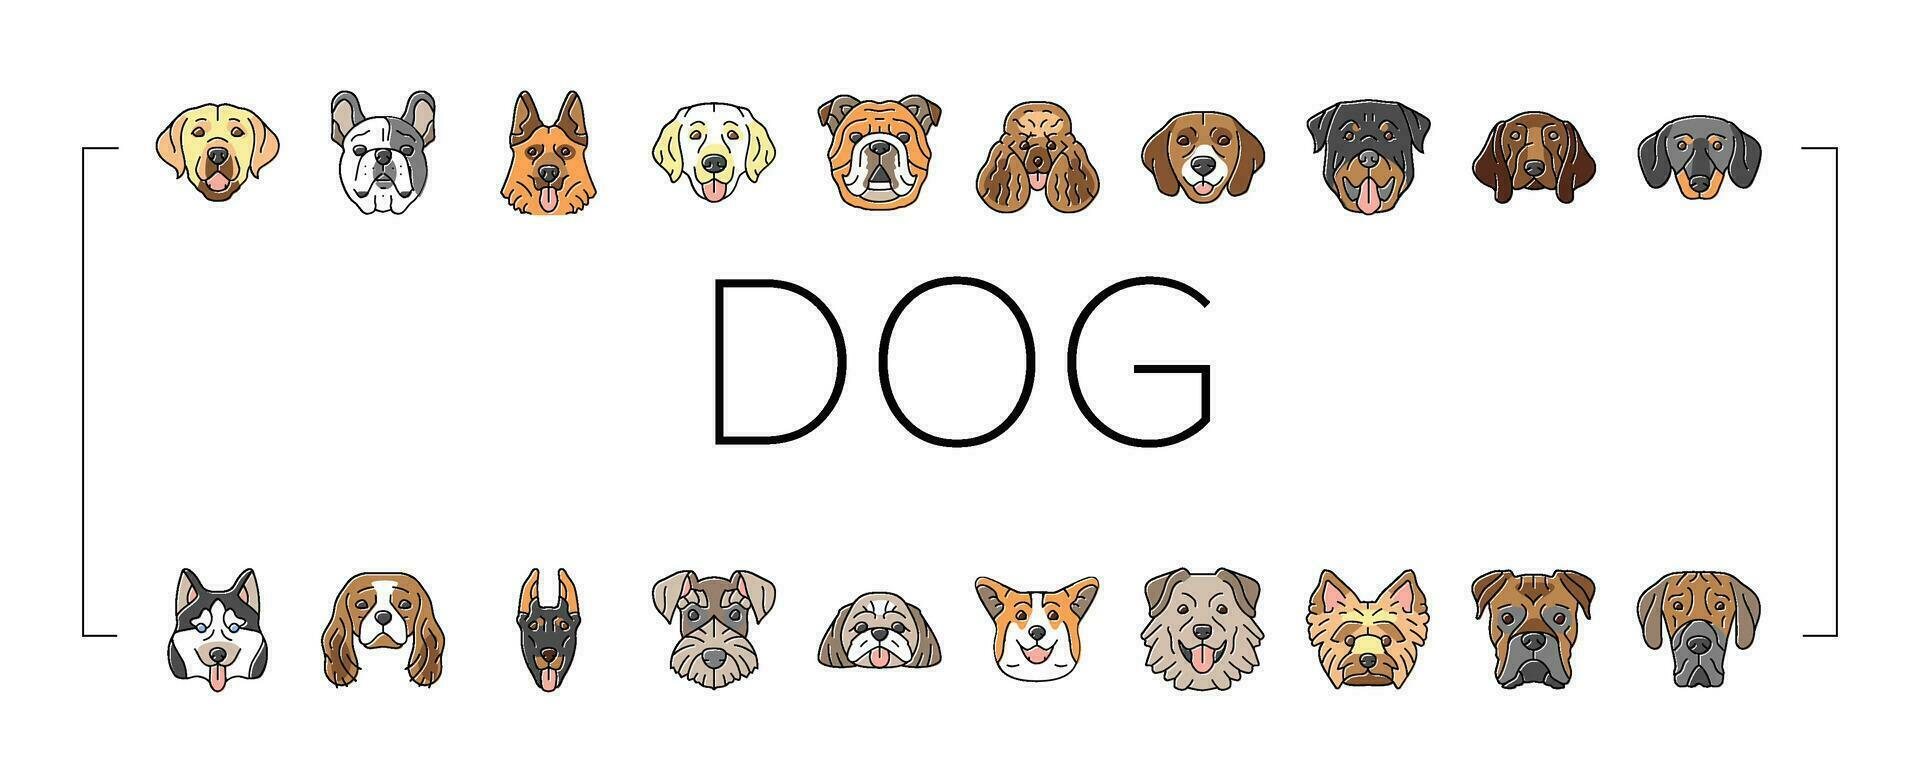 dog puppy pet animal cute icons set vector